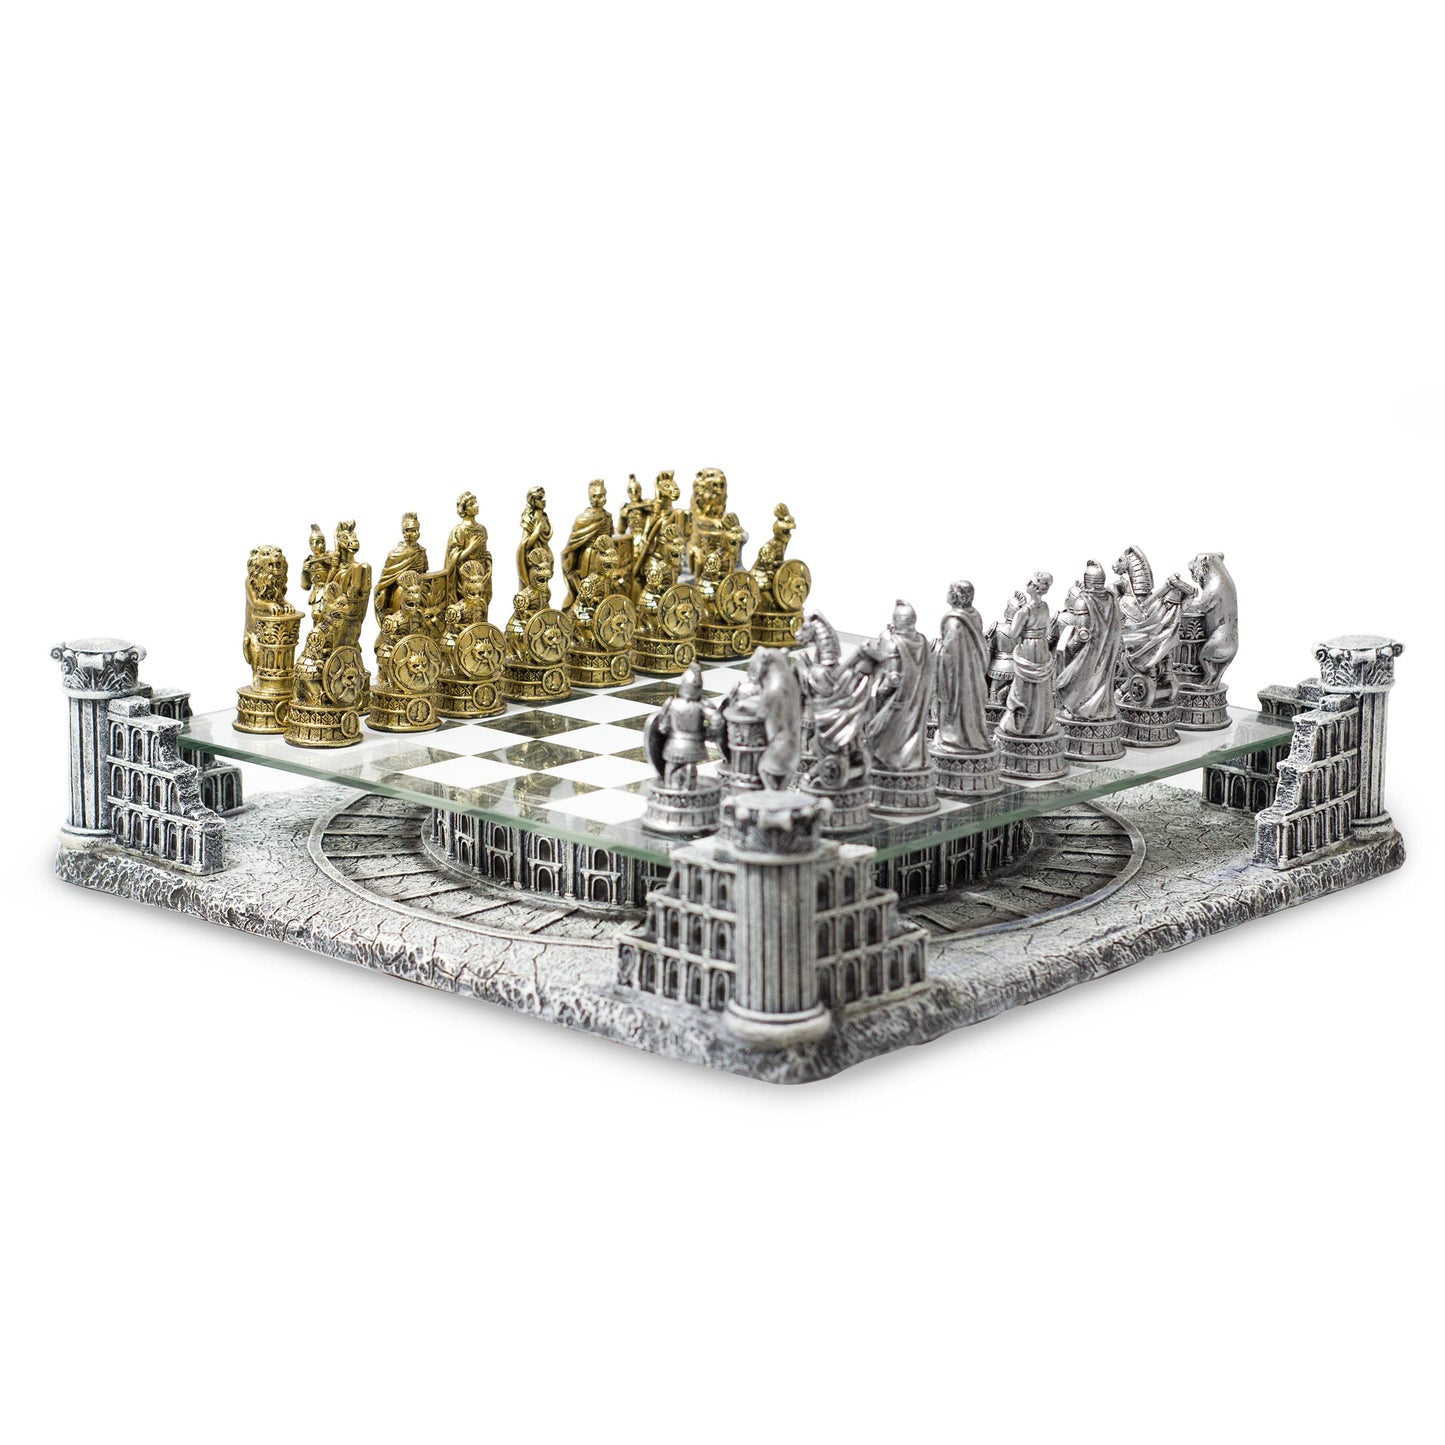 BB Brother Brother Ancient Roman Gladiators 3D Chess Board Game Set, Glass Board, Handmade Gold and Silver Polyresin Chess Pieces For 2 Players